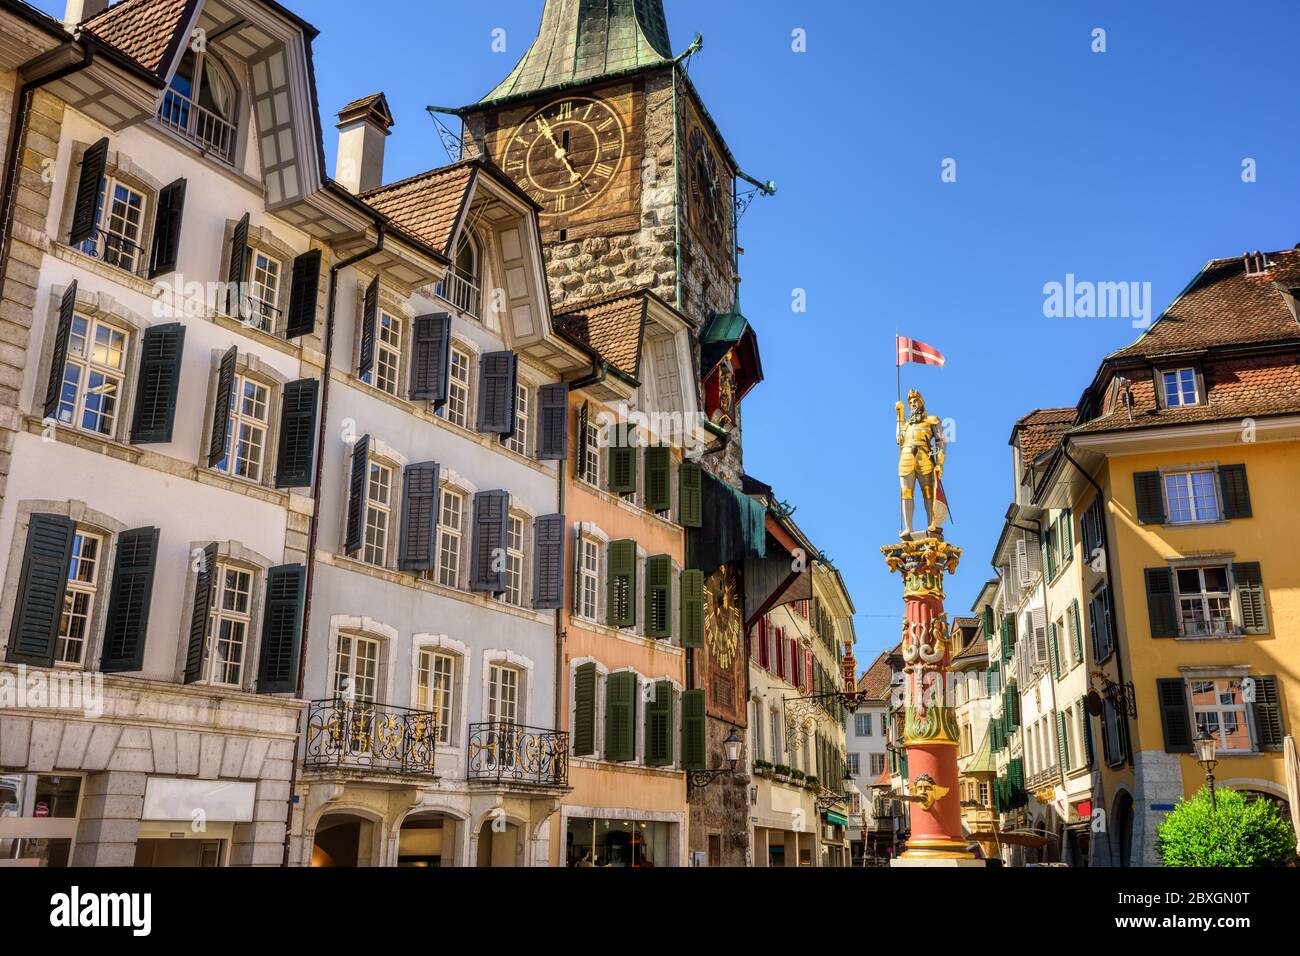 Historical Old town center of Solothurn city, Switzerland, with the Clock tower and St. Ursen statue Stock Photo